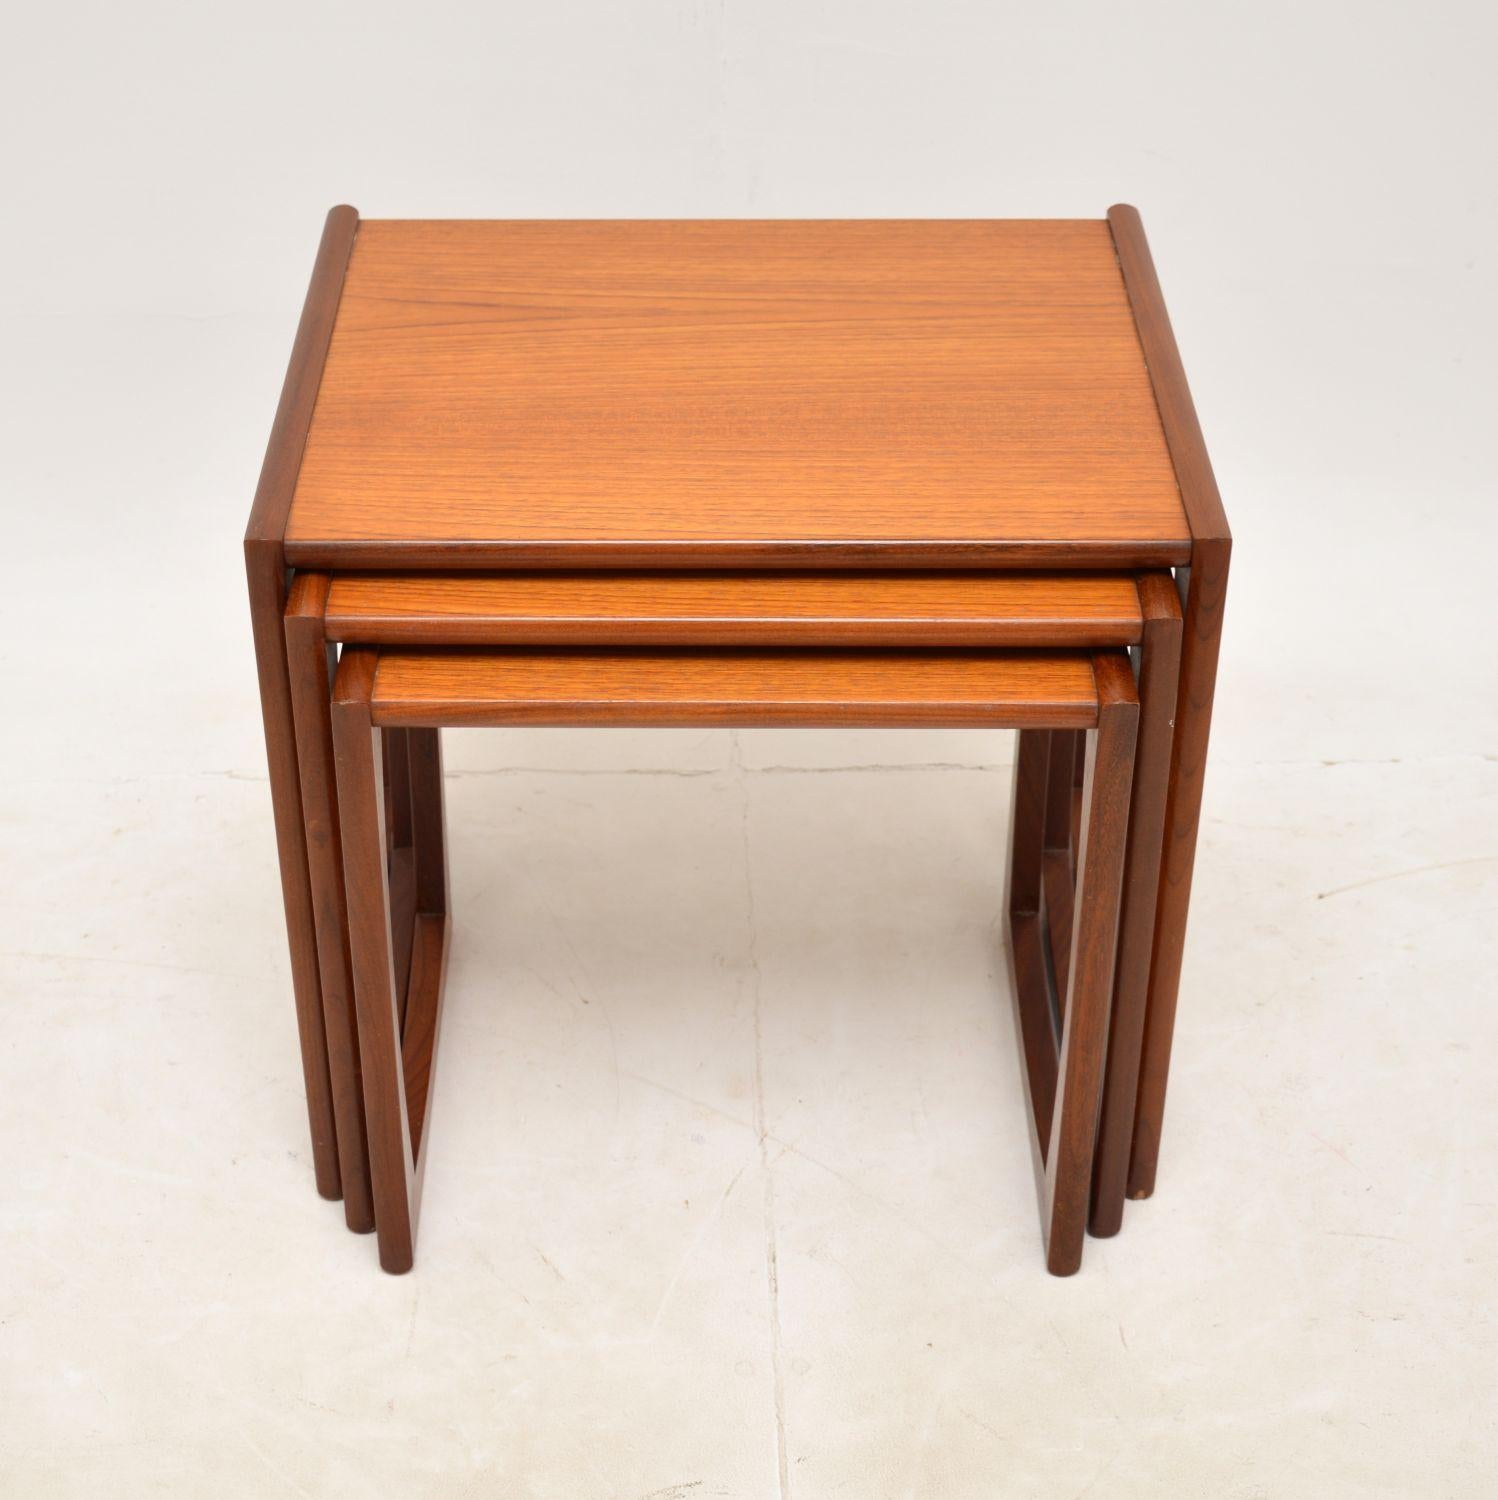 A stunning and iconic design, these teak nesting tables were made by G Plan. This model is from the Quadrille range, they were made in England and date from the 1960s.
The quality is amazing and these have a very clever design. They have slightly